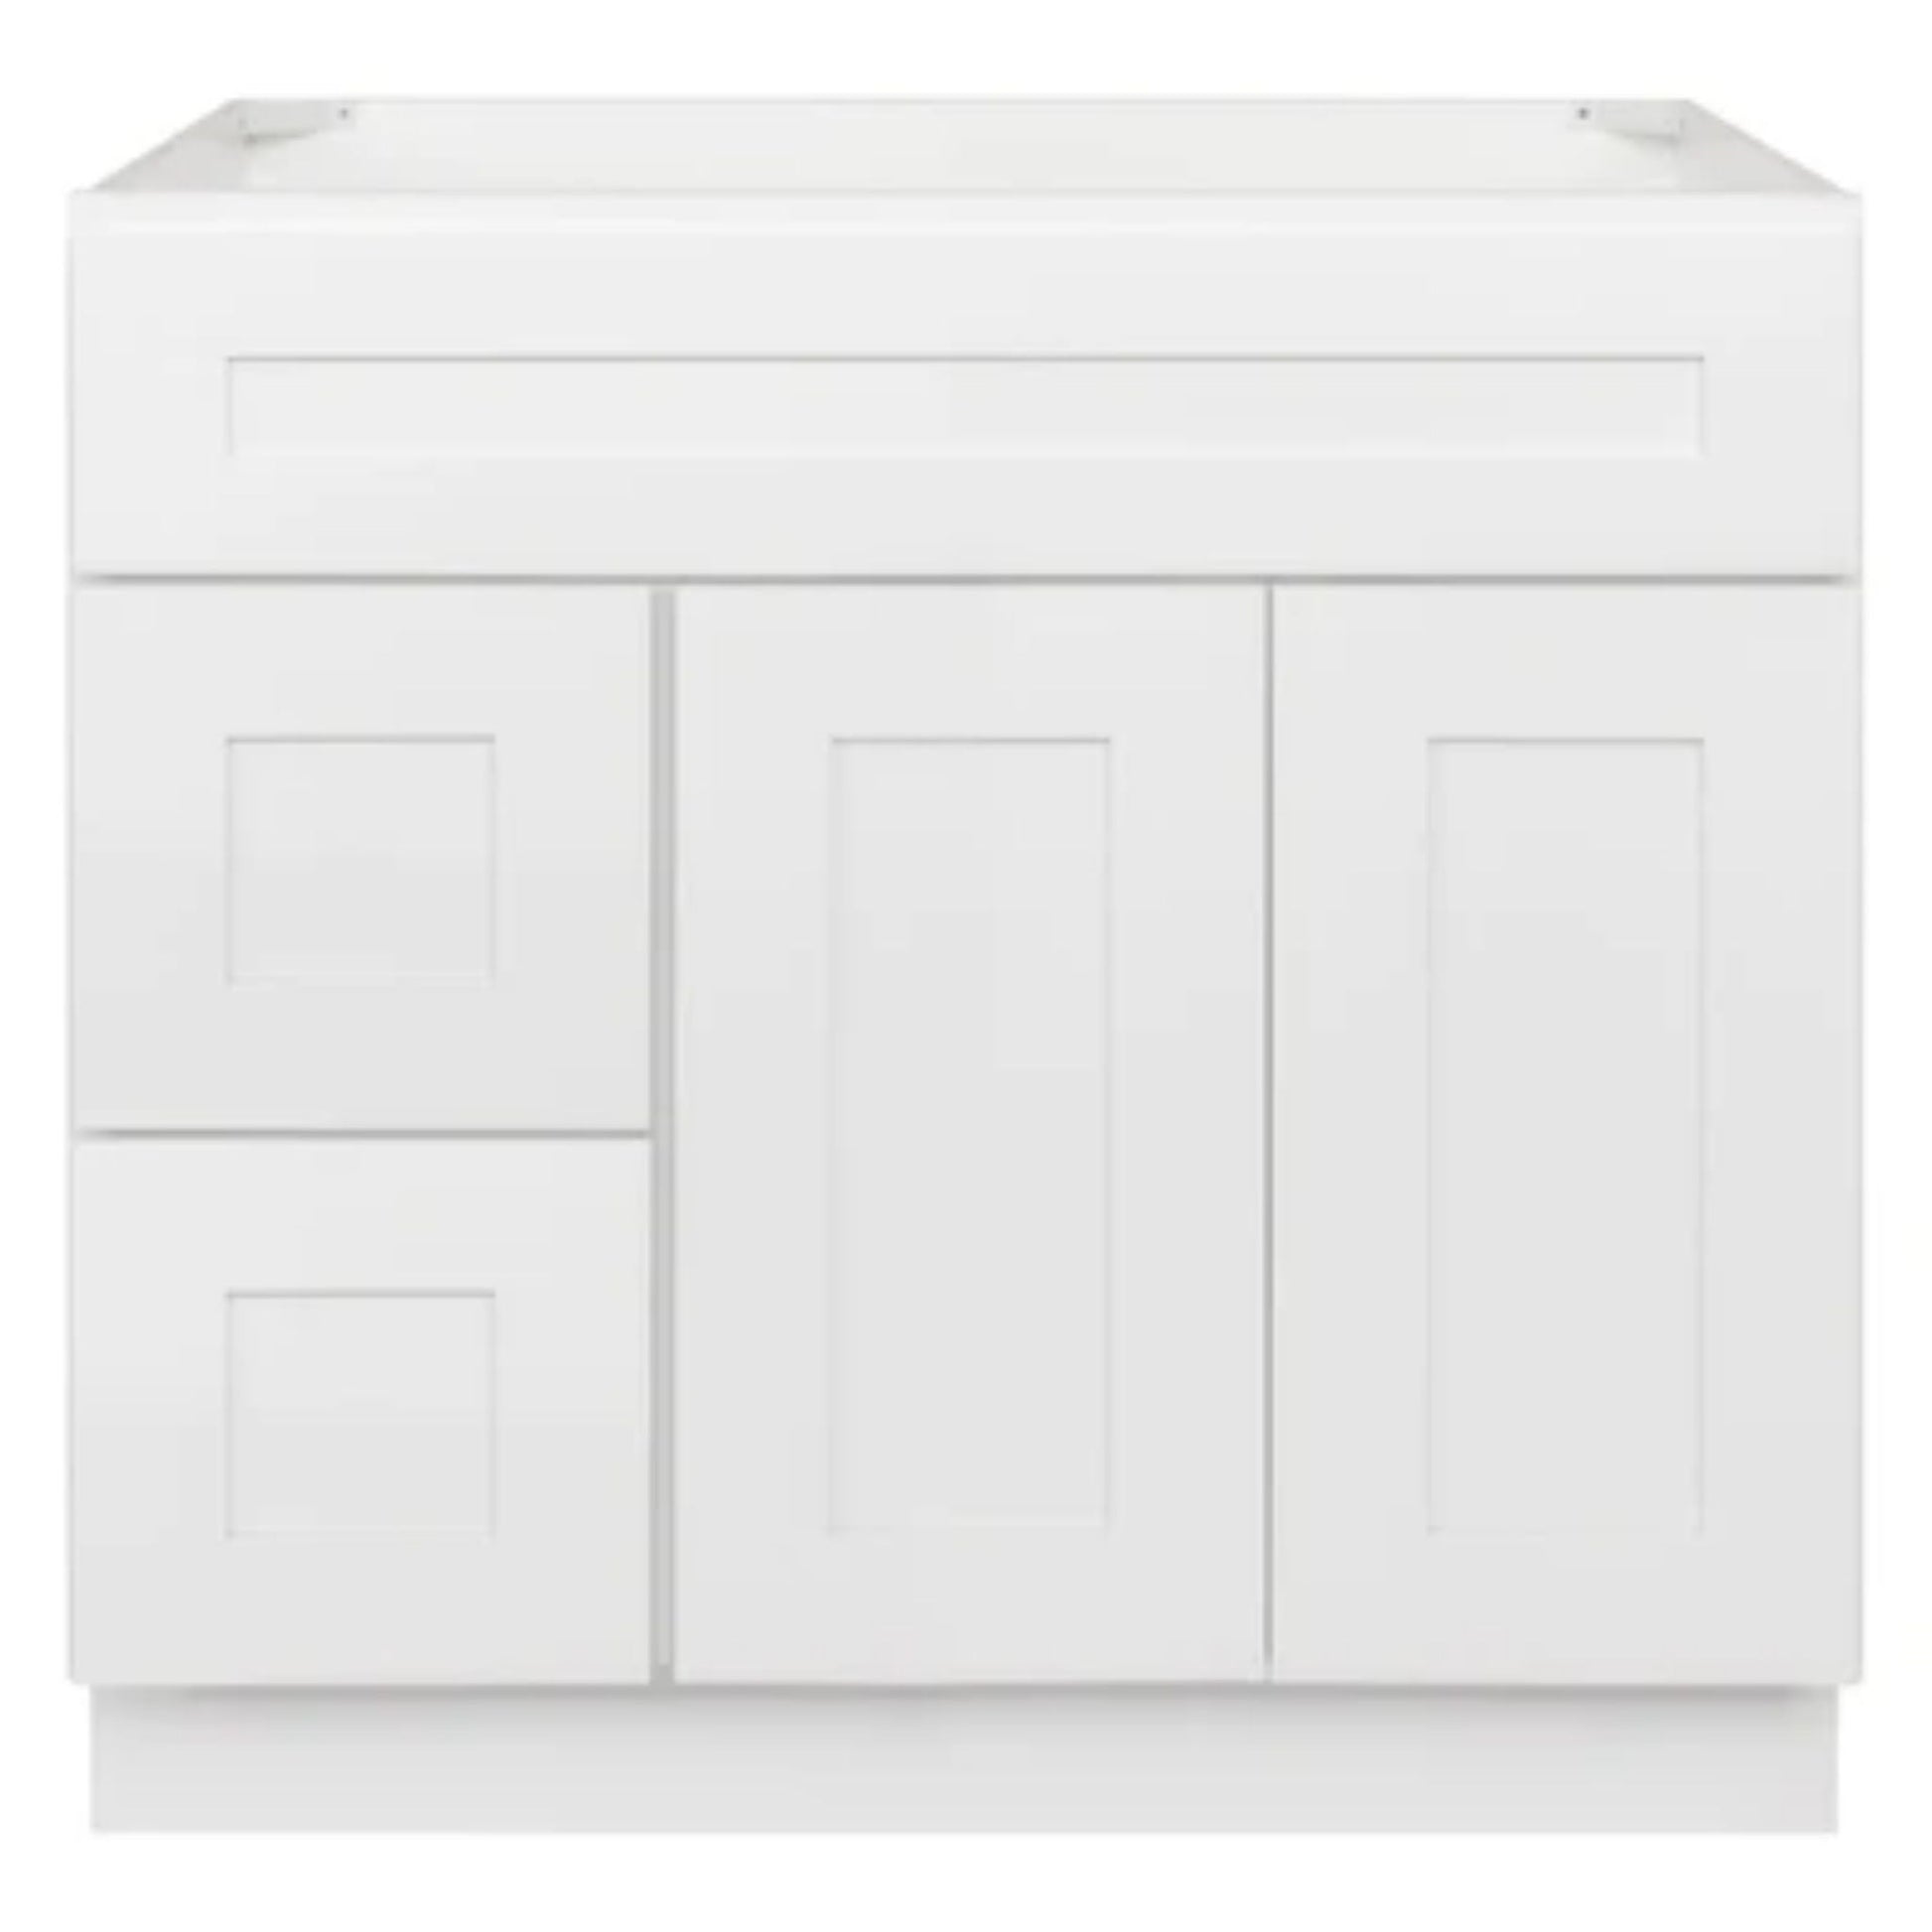 LessCare 30" x 21" x 34 1/2" Alpina White Vanity Sink Base Cabinet with Left Drawers